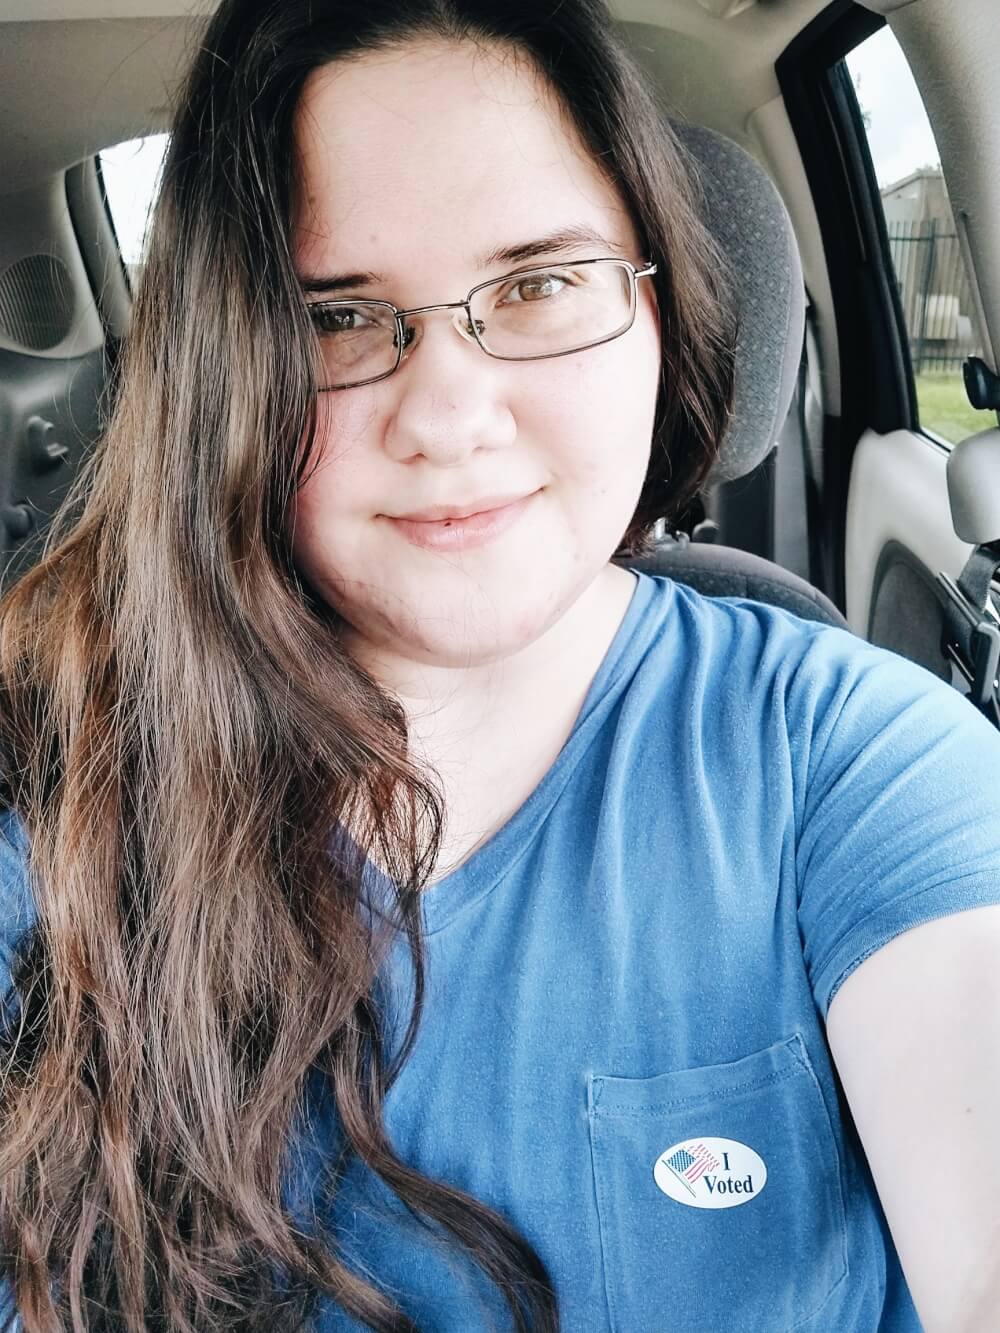 Car selfie in blue top with "I voted" sticker and wavy hair